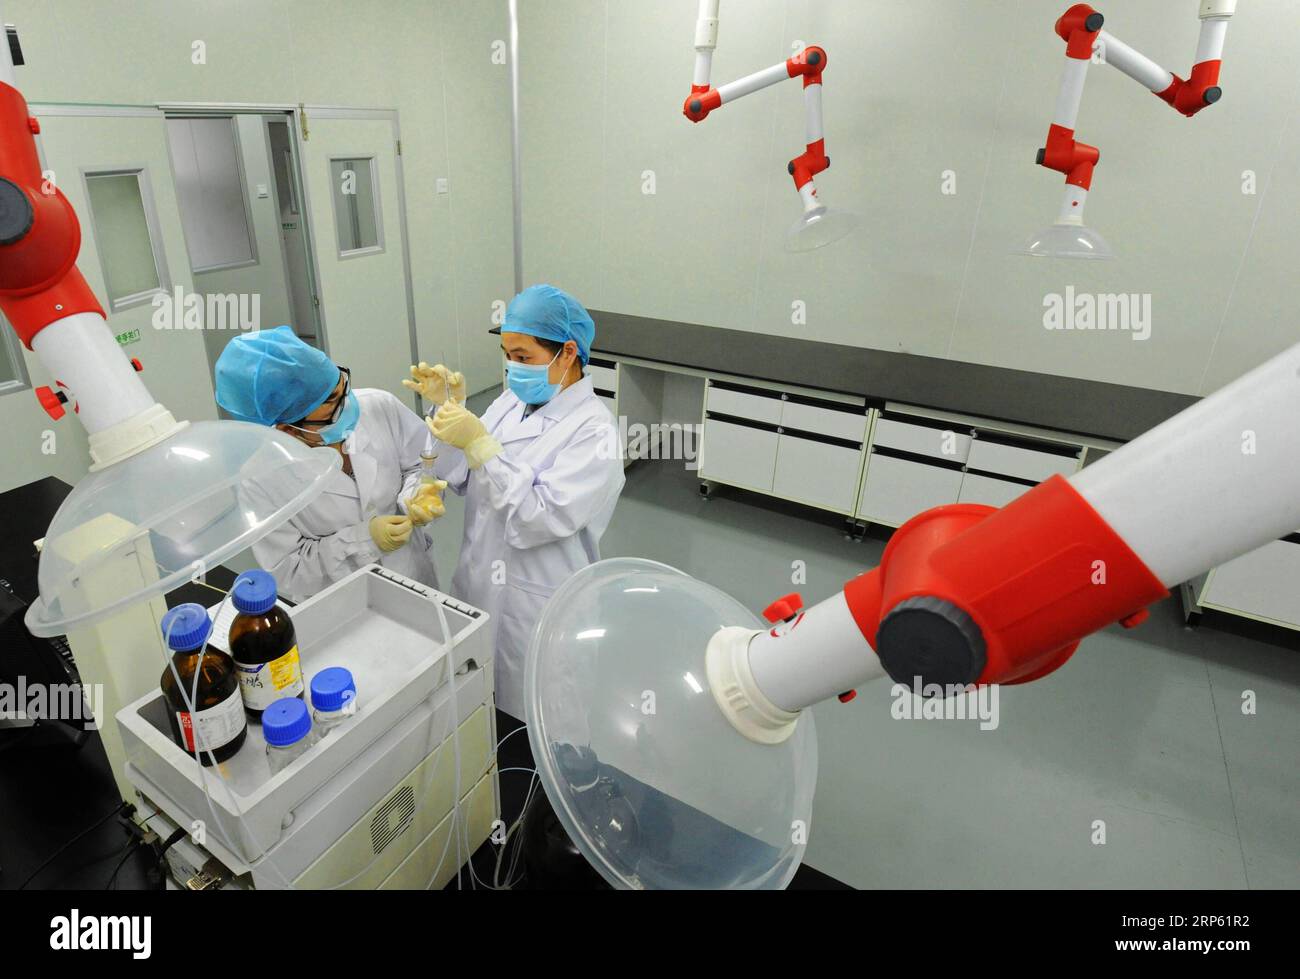 (181230) -- BEIJING, Dec. 30, 2018 (Xinhua) -- Technicians detect a non-alcohol drink made of bamboo in a biotechnology company in Anji County, east China s Zhejiang Province, June 3, 2016. Anji is known for its pleasant environment with flourishing bamboo plantations and many scenes from the famous movie Crouching Tiger, Hidden Dragon were shot here. The county persists in green, low-carbon development, and strives to protect environment as well as to develop local economy. China has pledged to coordinate its efforts of environmental protection and economic development in 2019, an important y Stock Photo